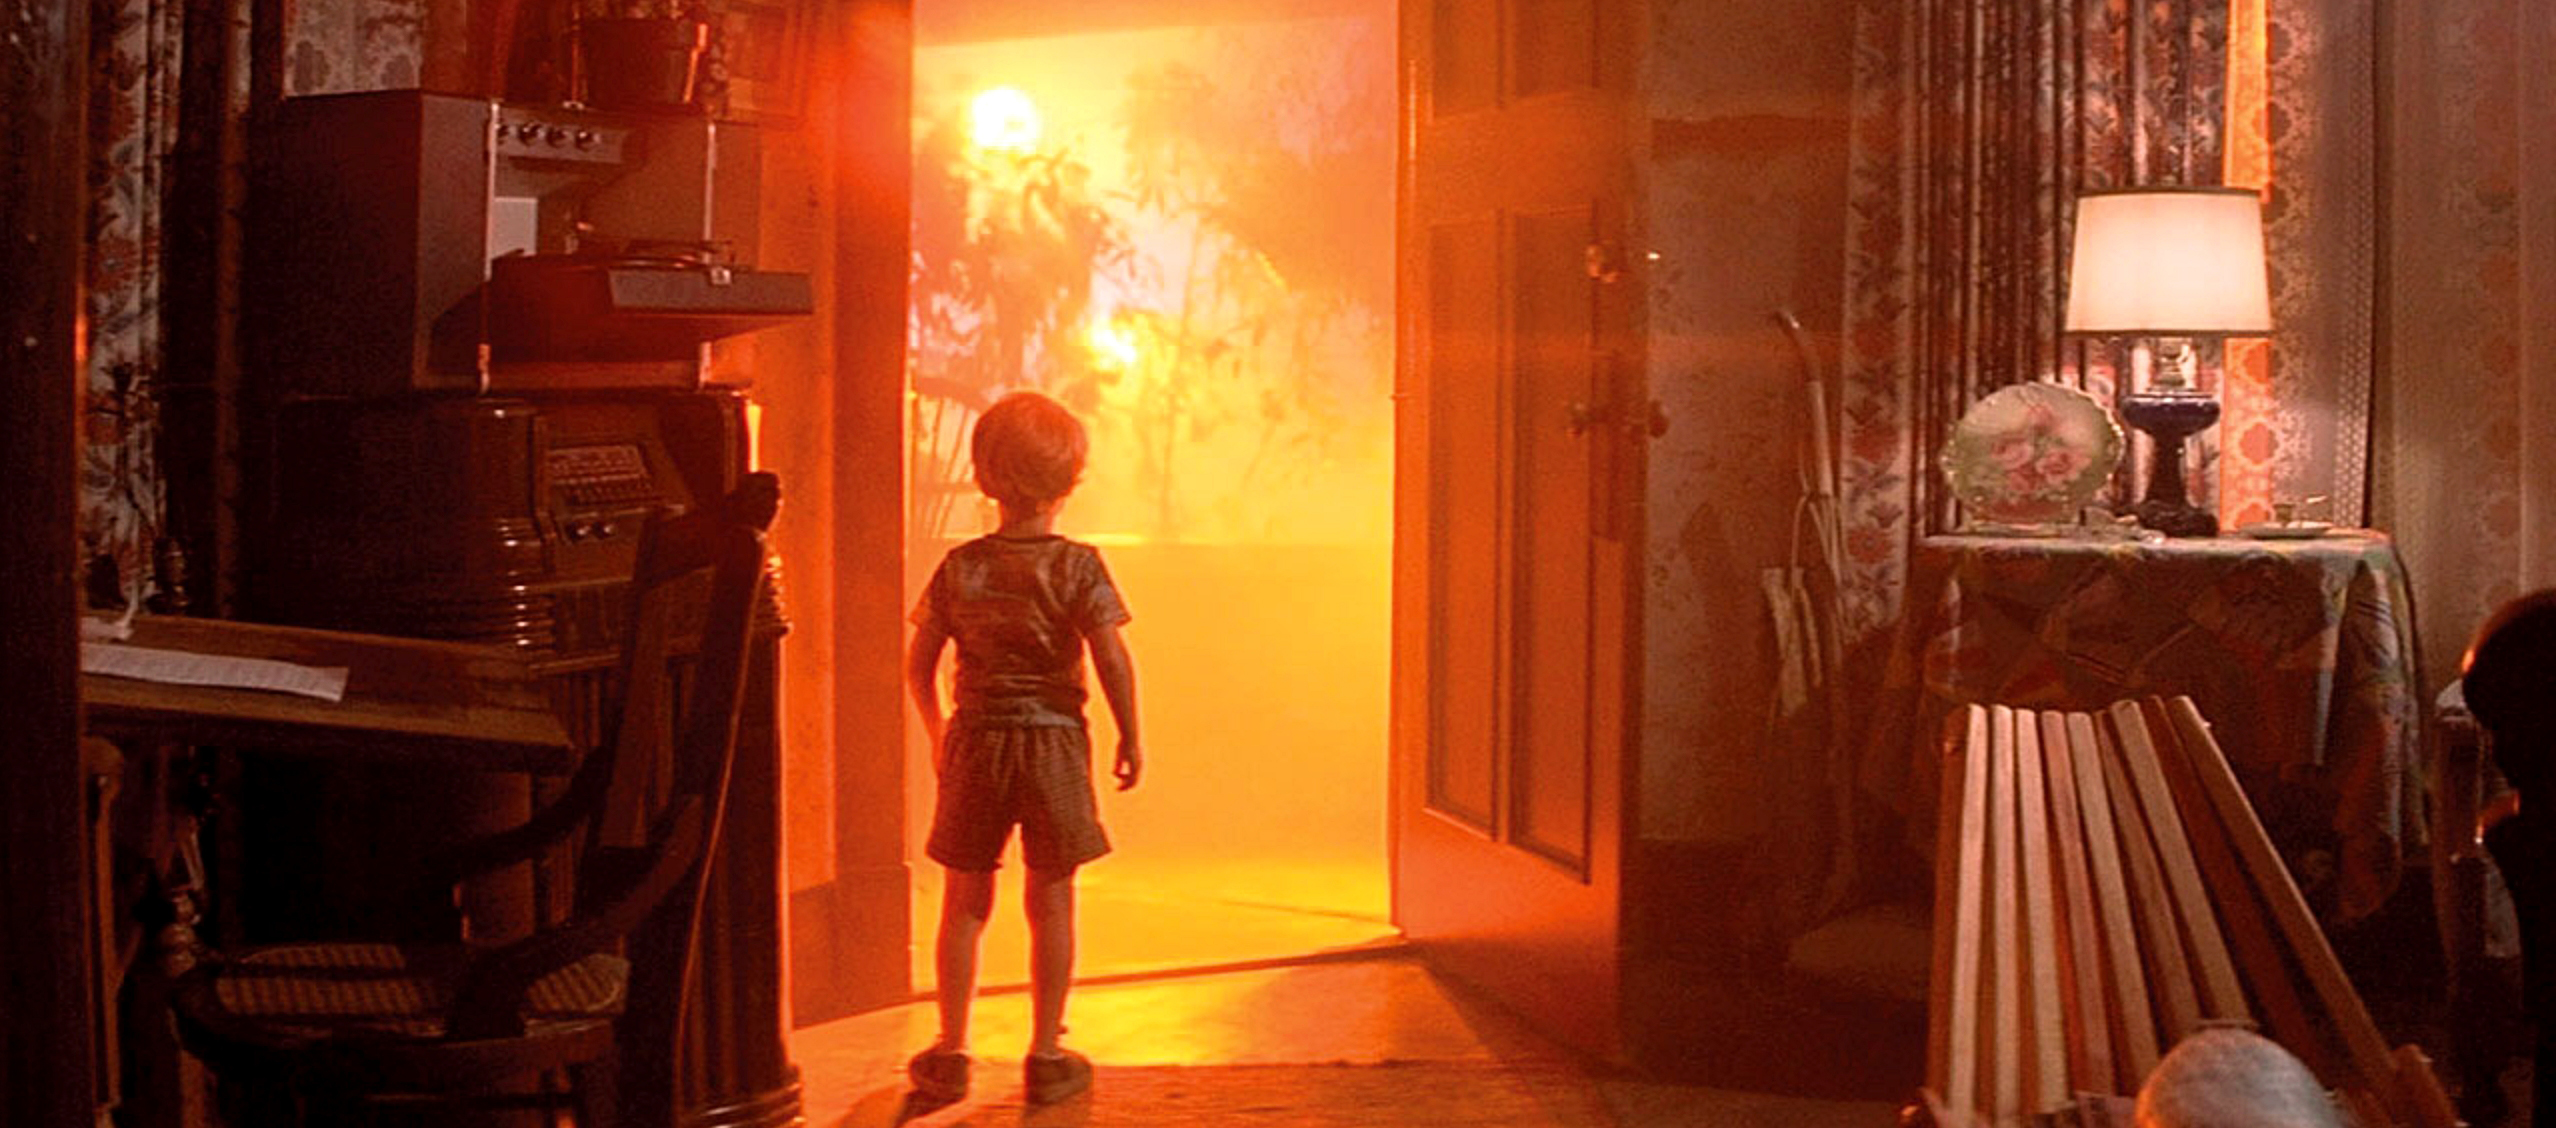 A little boy is standing in an open doorway, from which an orange light emanates.